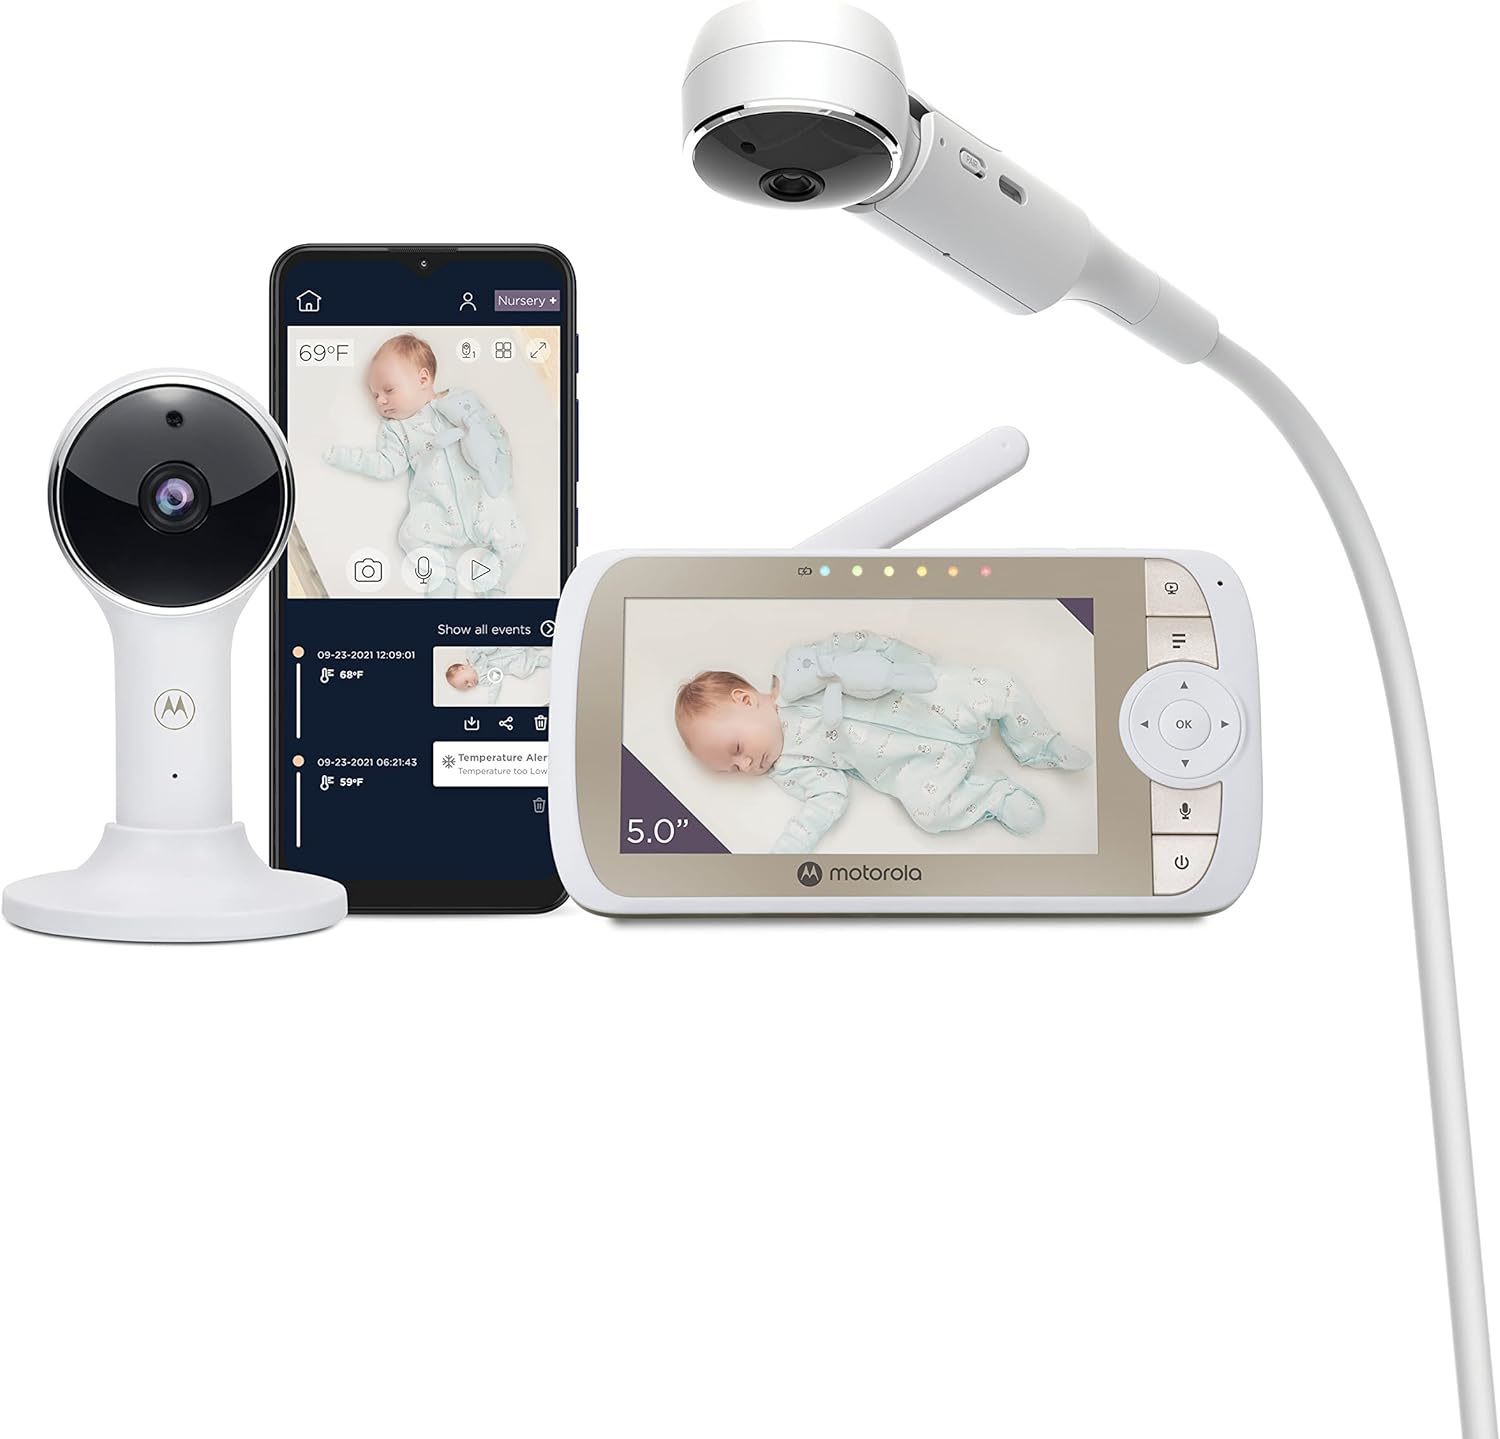 Primary image for Motorola Nursery VM65X Connect - Crib Mount Video Baby Monitor - 5 Inch 1080p